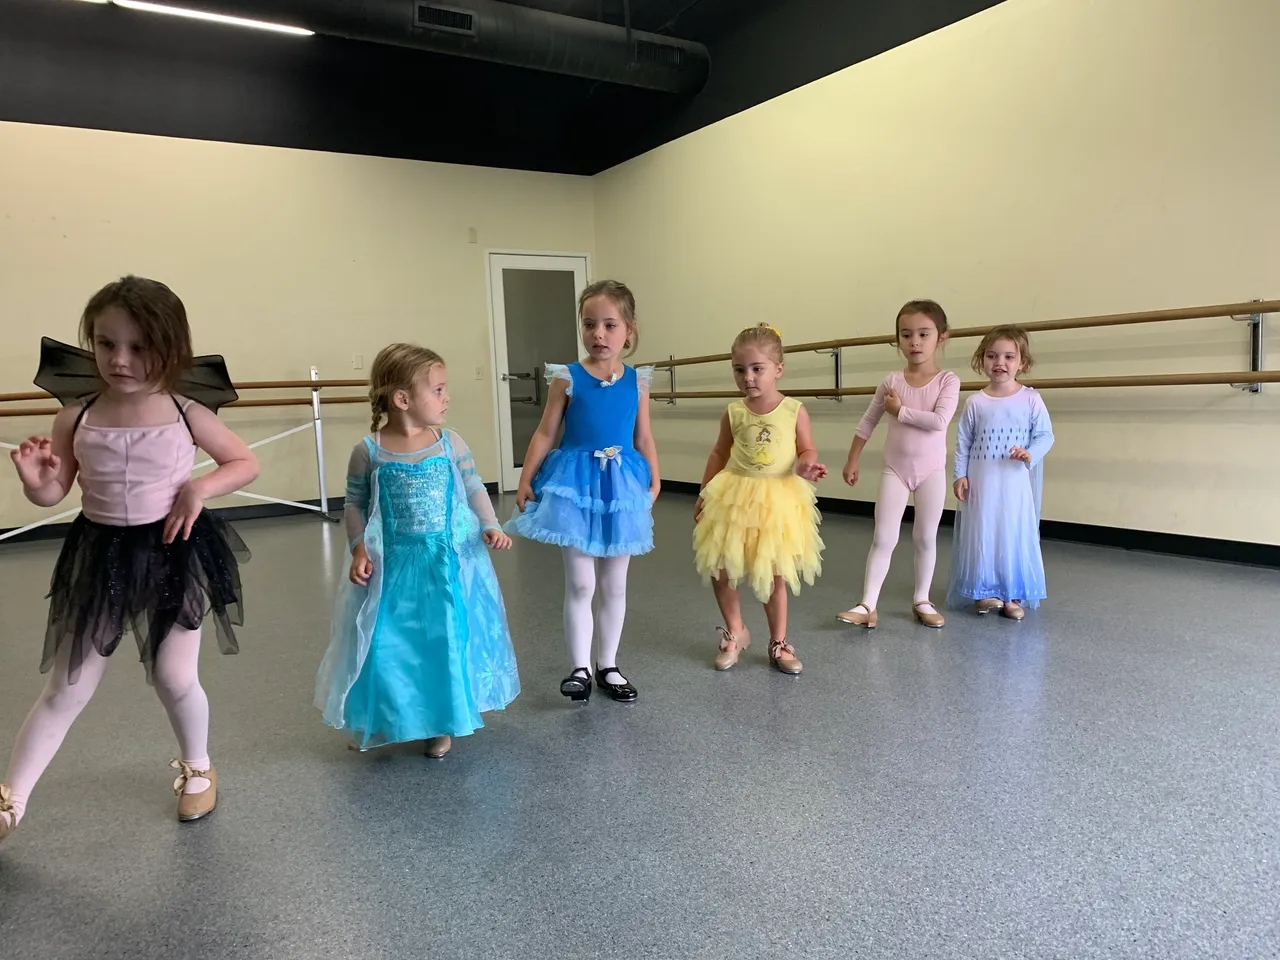 A group of young girls in costumes are practicing ballet.